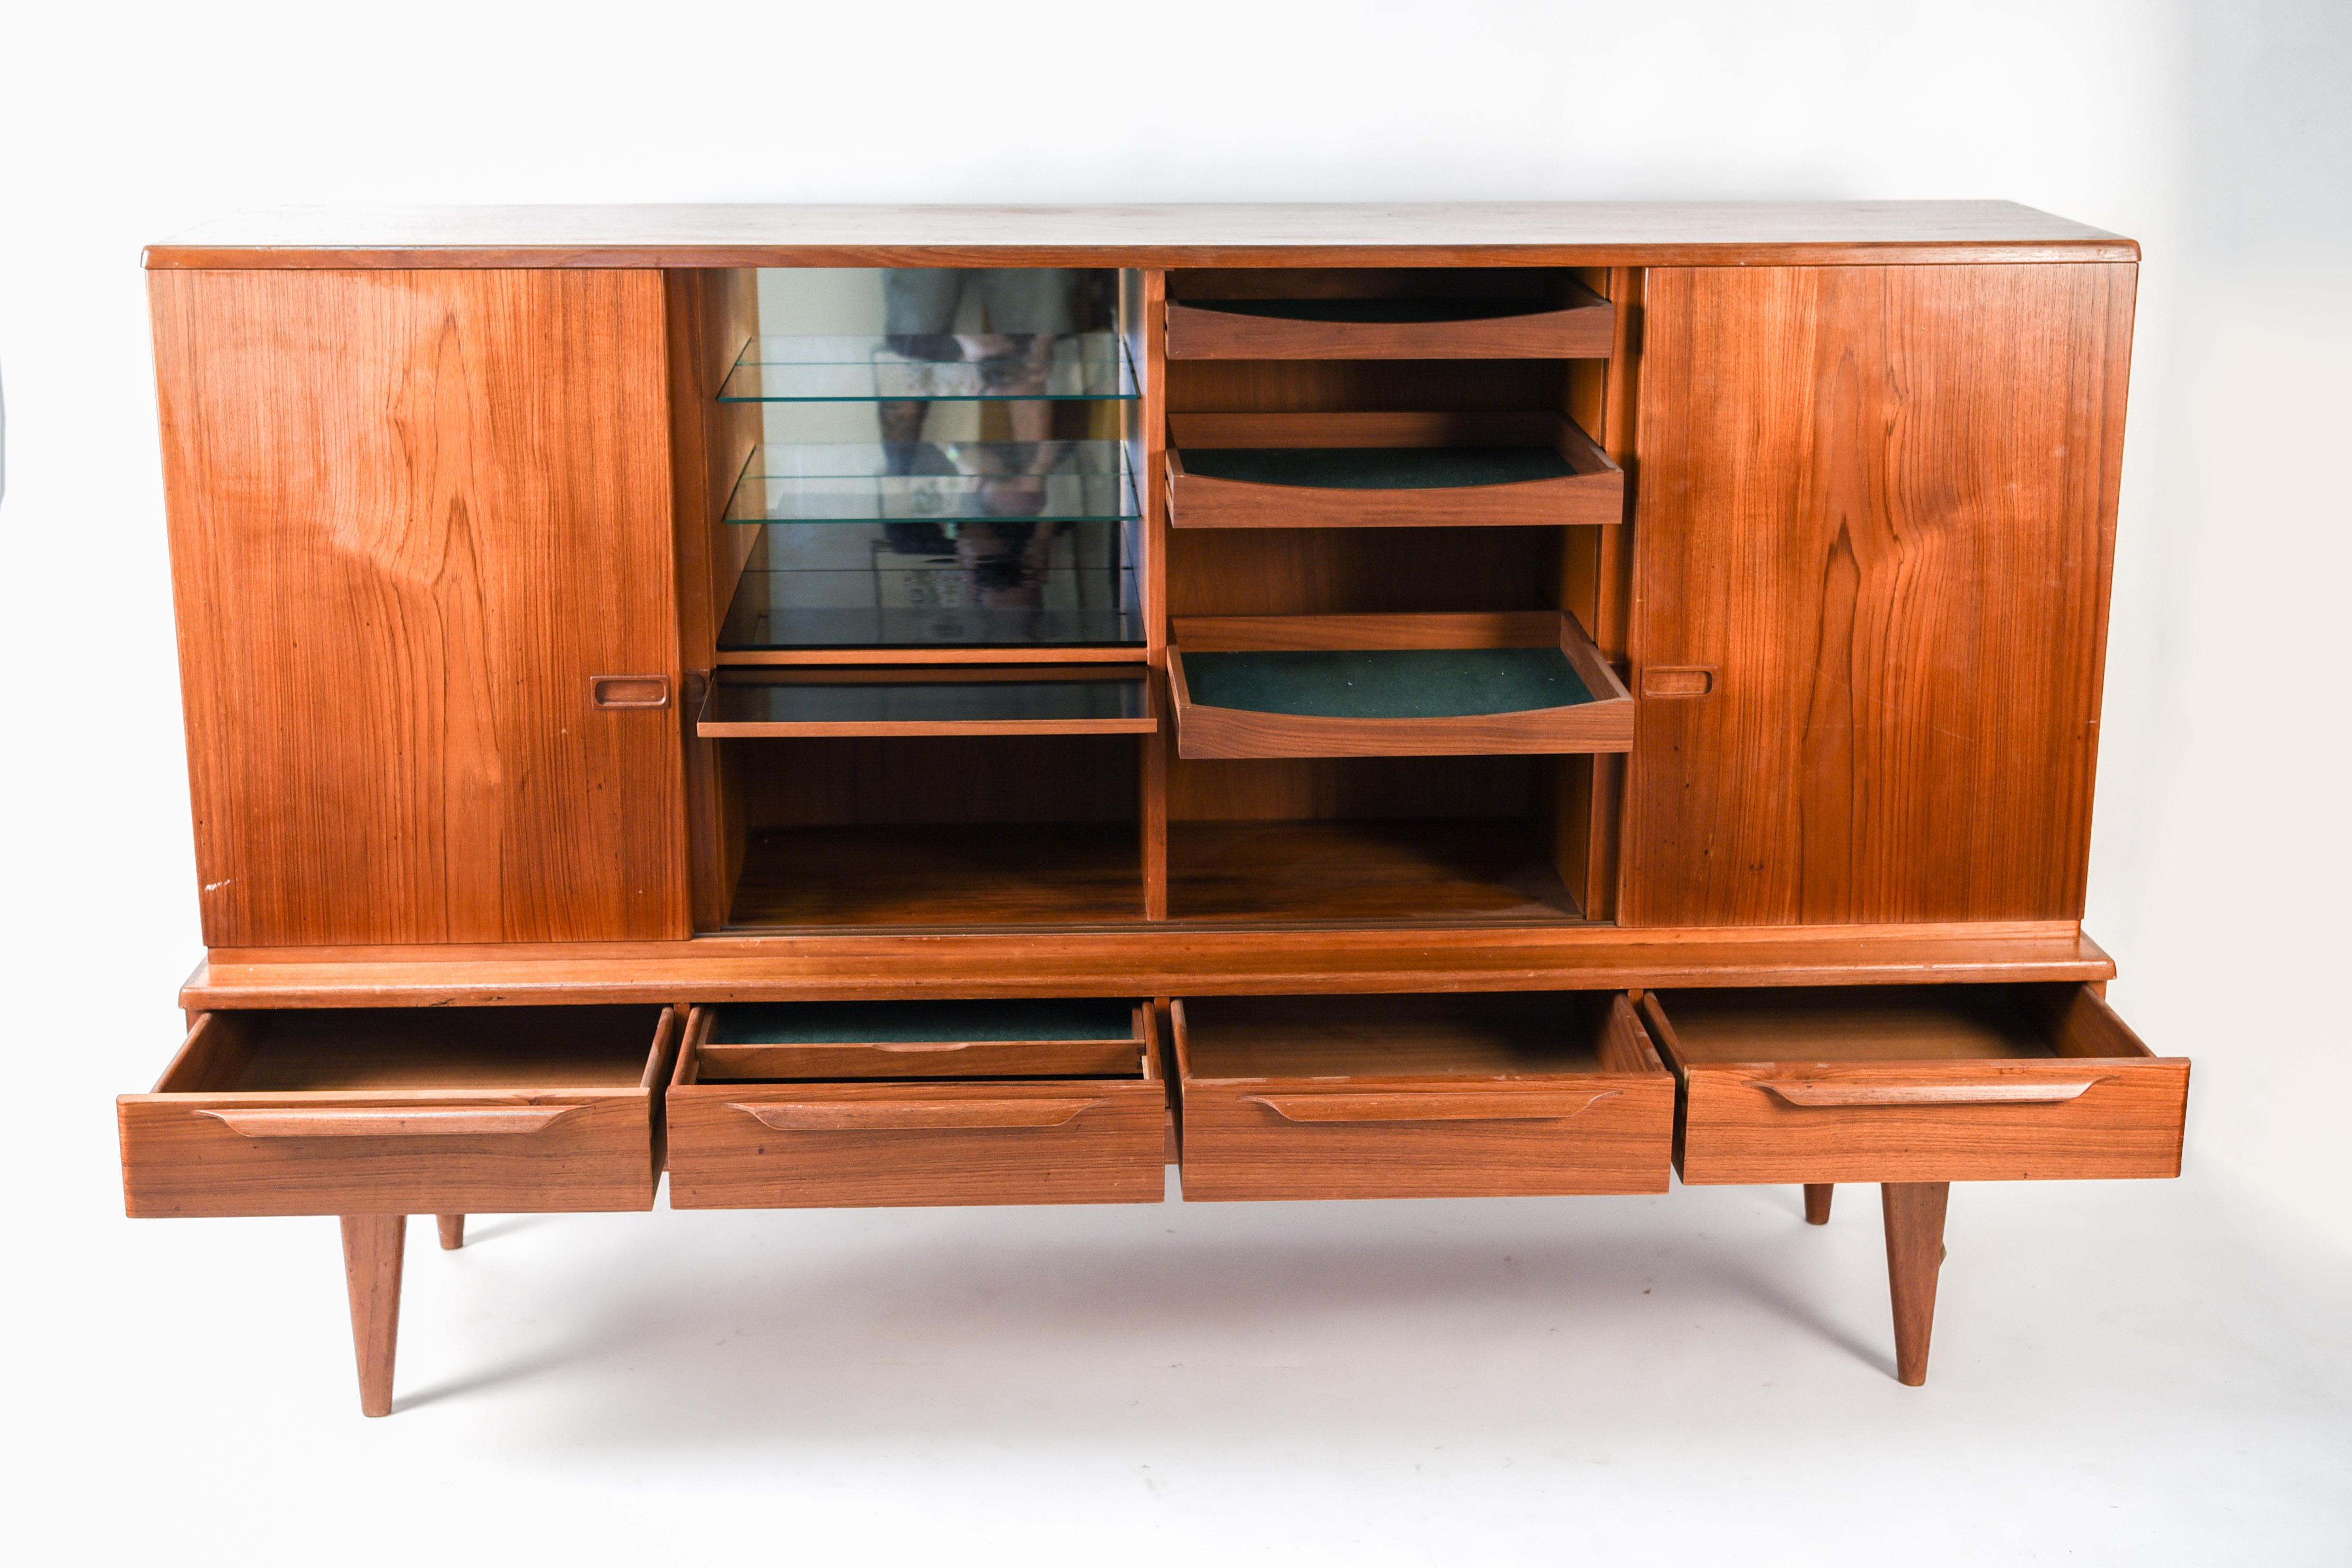 This Danish midcentury teak highboard was designed by Gunni Omann for Omann Jun Mobelfabrik, circa 1960s. This cabinet or sideboard features four sliding doors above four drawers, making for plenty of available storage space.